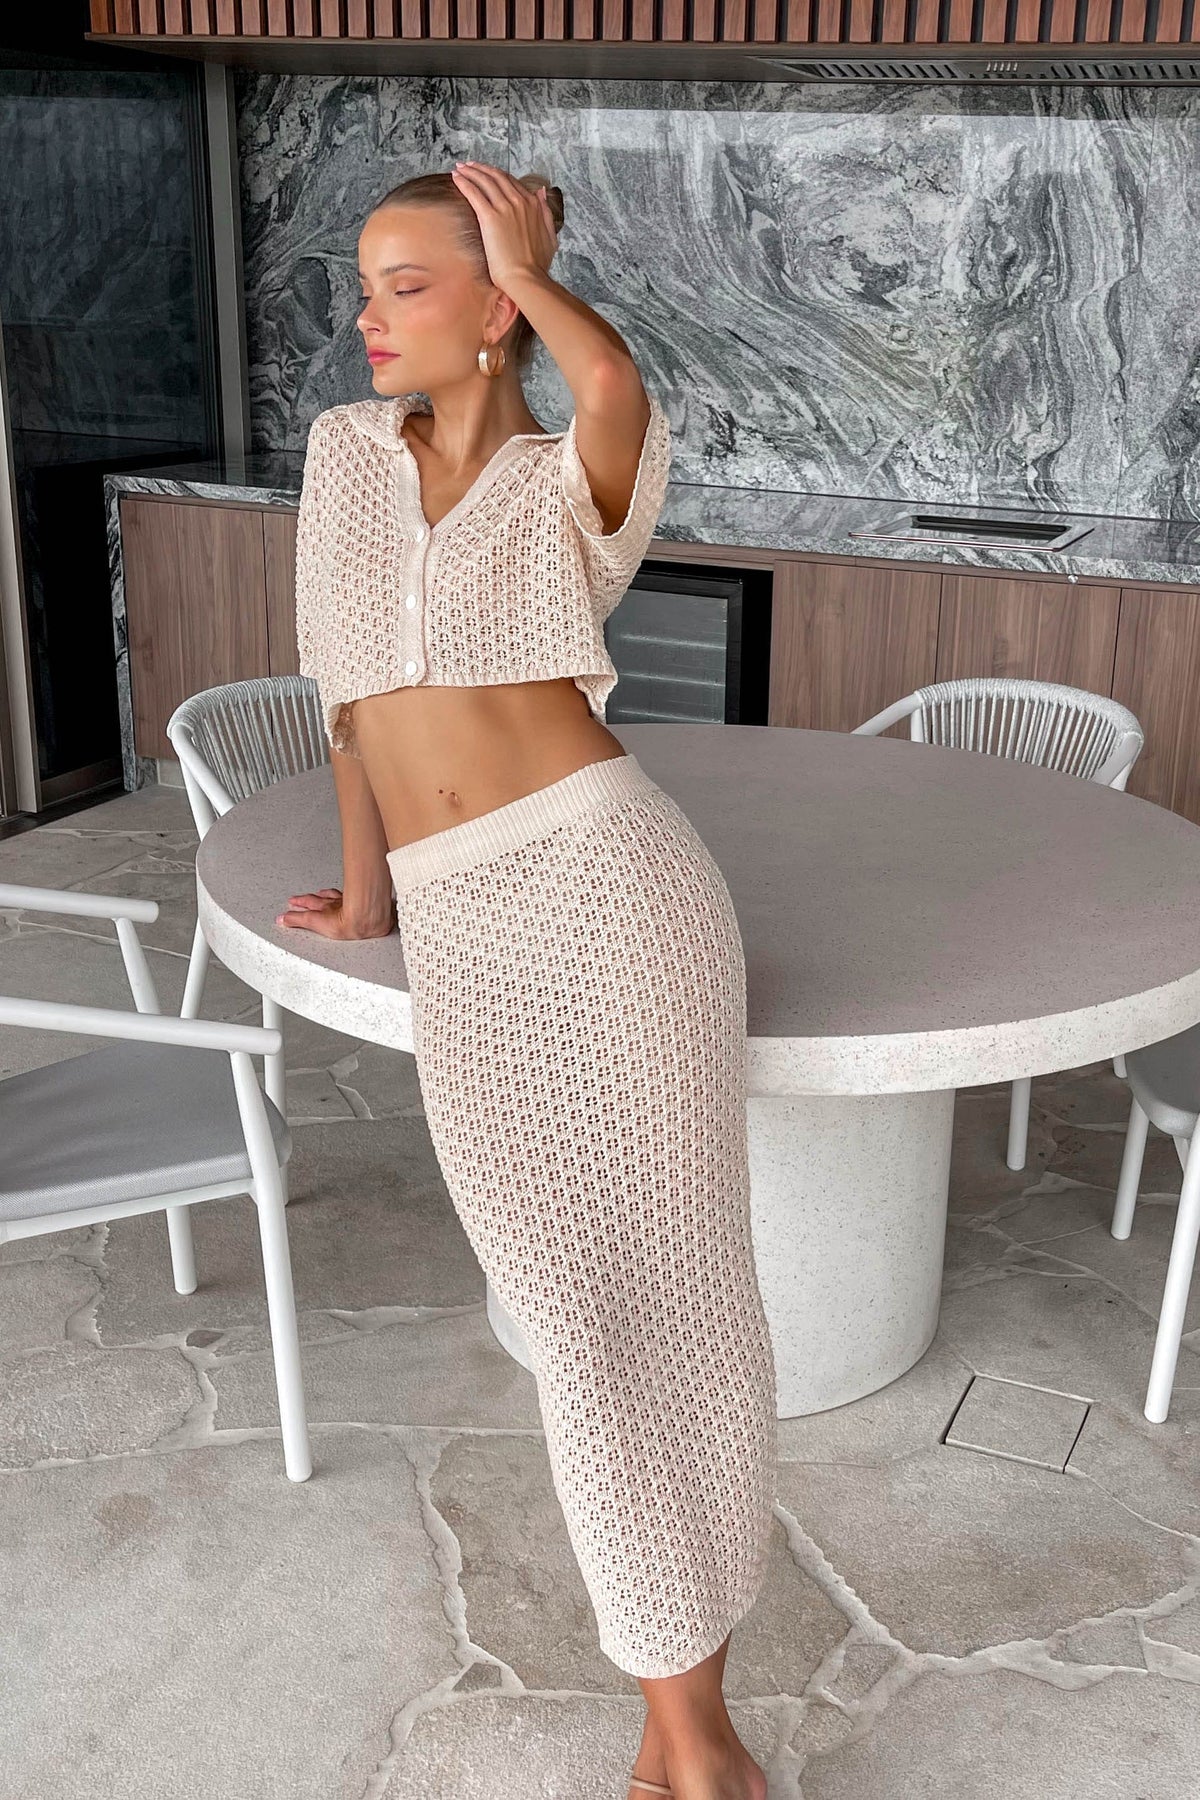 Viella Skirt, ACRYLIC &amp; POLYESTER, ACRYLIC AND POLYESTER, BEIGE, BOTTOMS, HIGH WAISTED, MAXI SKIRT, MIDI SKIRT, new arrivals, POLYESTER &amp; ACRYLIC, SKIRTS, , -MISHKAH